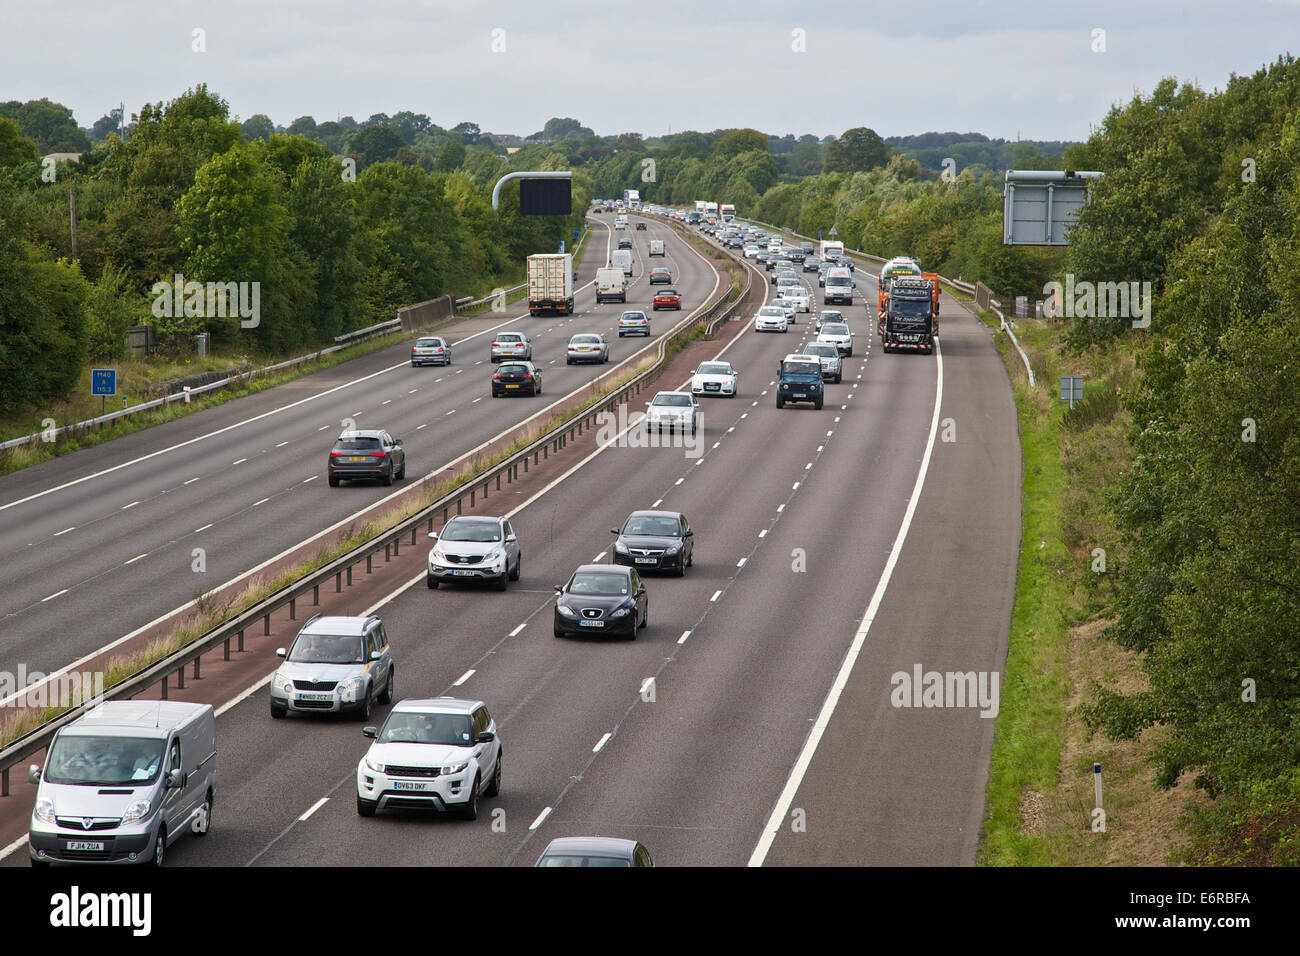 Banbury, Oxfordshire, UK. 29th Aug, 2014. Traffic delays on M40 Motorway after accident between Junctions 11 Banbury & 10 Brackley. Credit:  David Hawtin/Alamy Live News Stock Photo